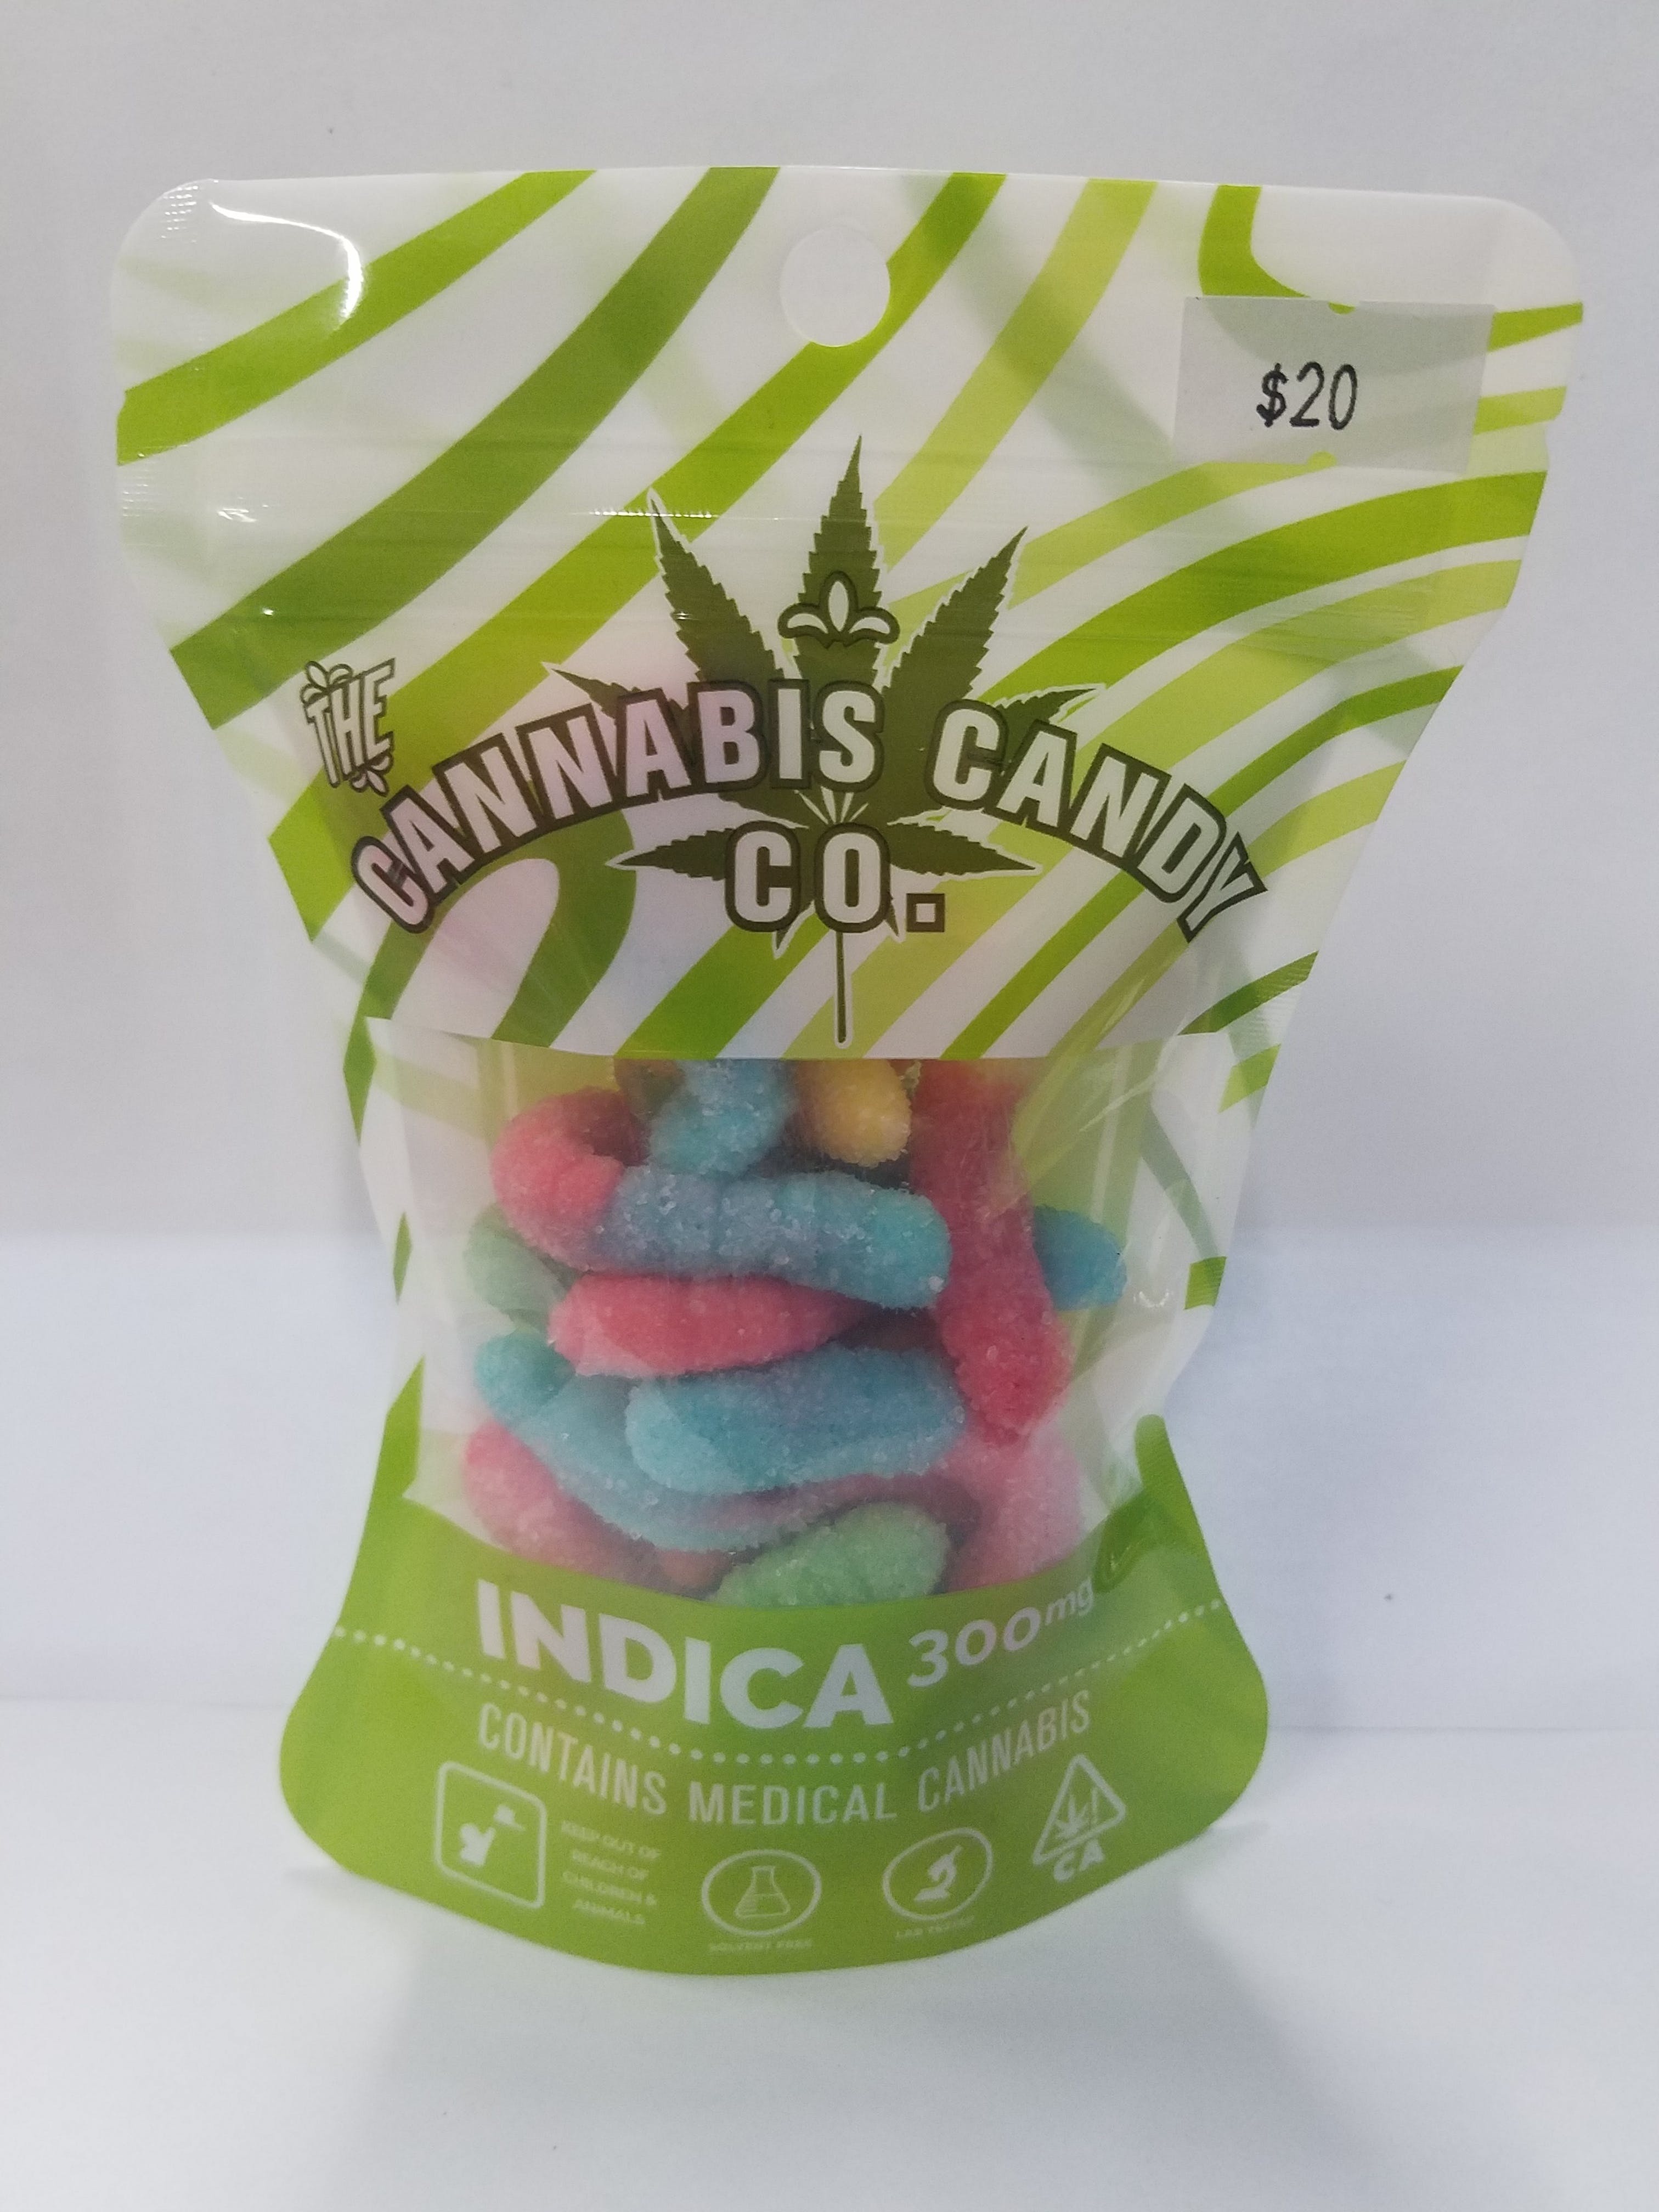 edible-the-cannabis-candy-co-sour-worms-300mg-indica